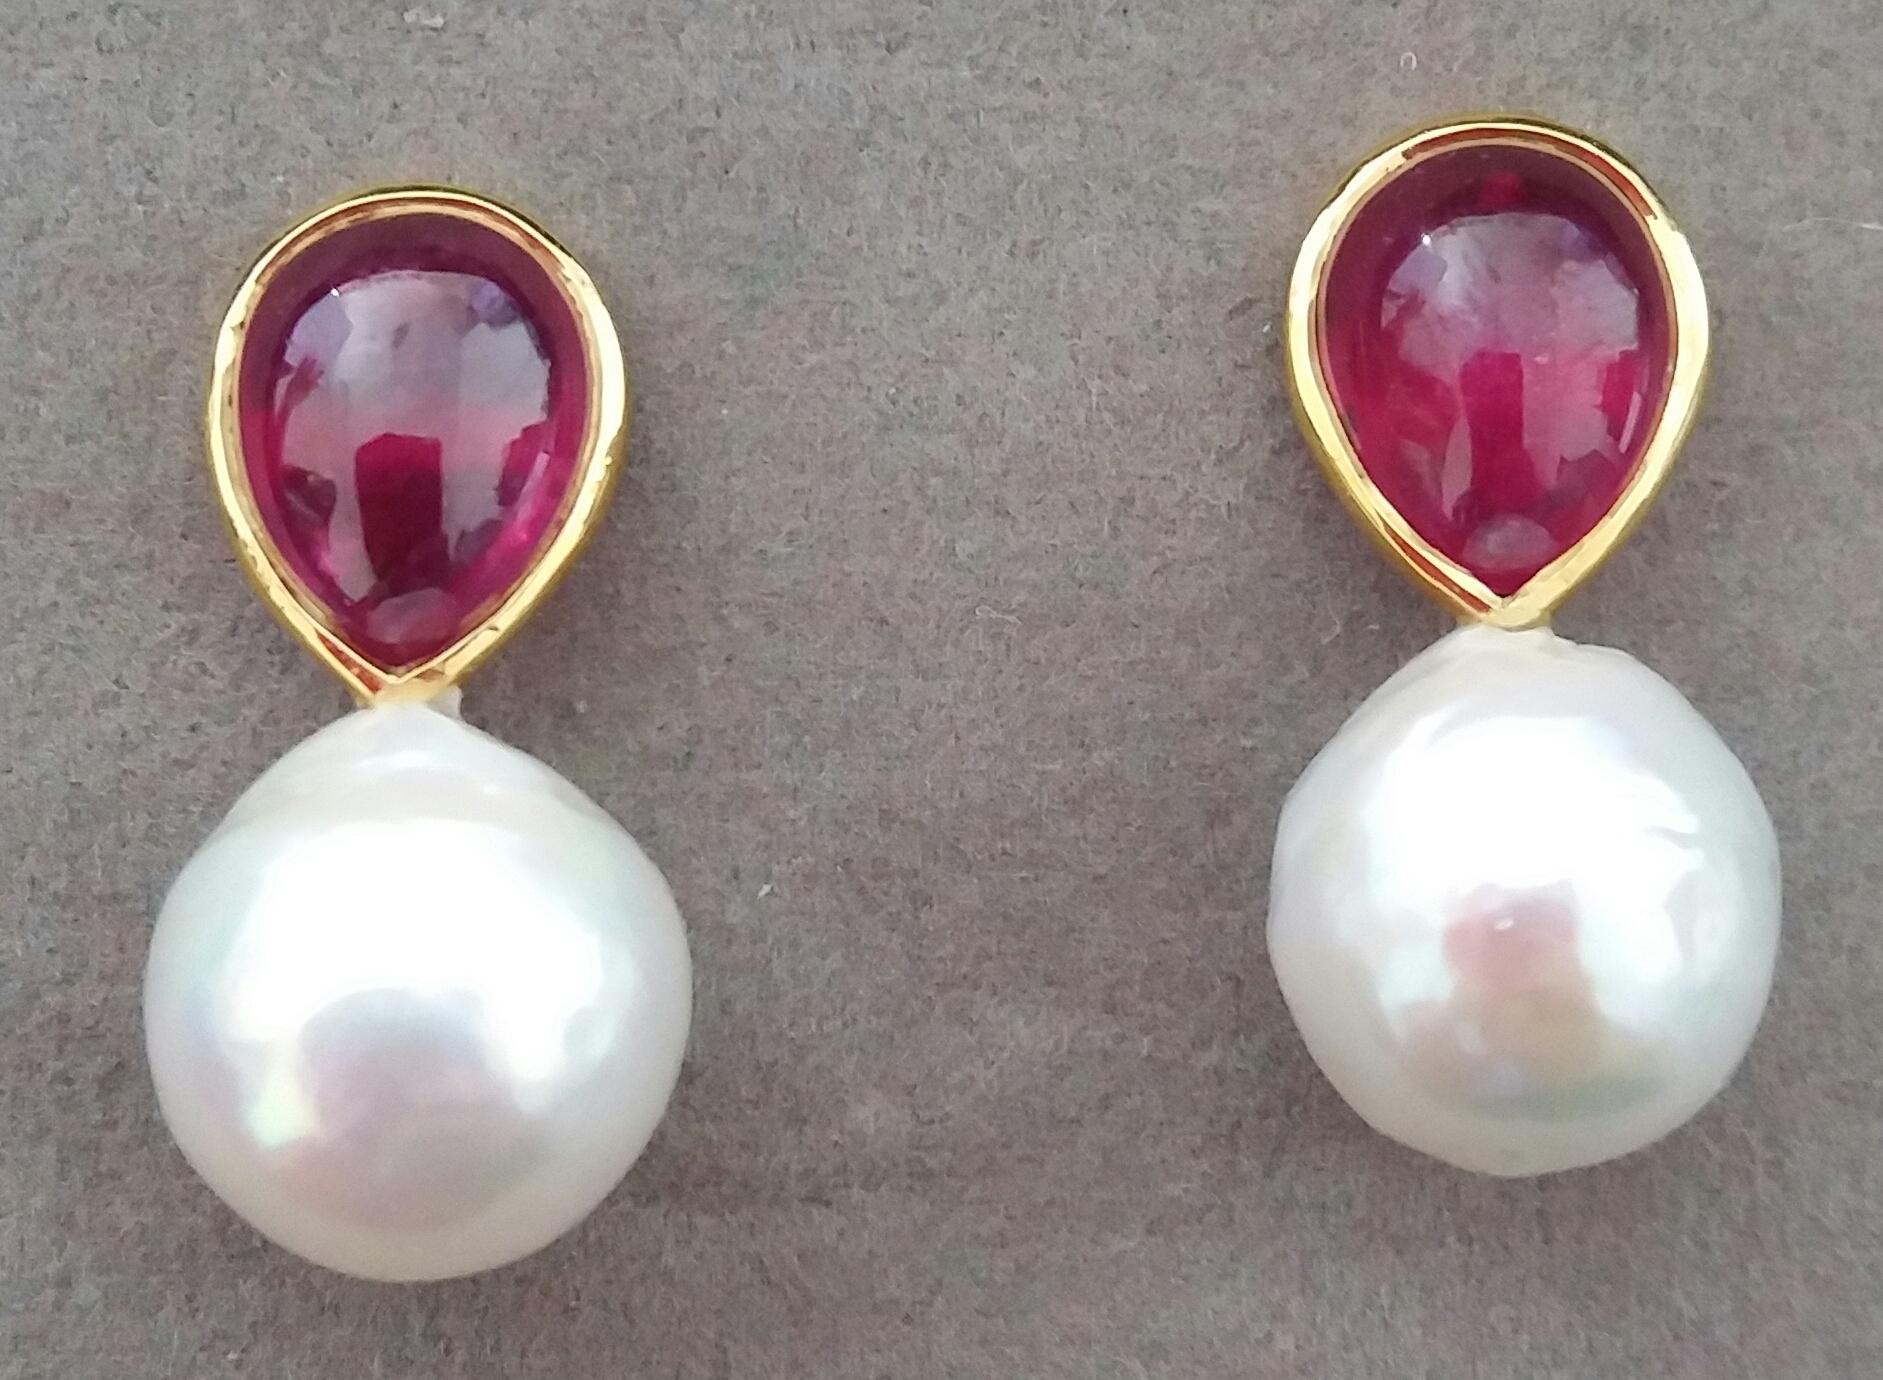 These simple chic and handmade stud earrings have a pair of Pear Shape Ruby Cabs measuring 9 x 11 mm and weighing 8,7 carats set in solid 14 Kt. yellow gold bezel on the top and in the lower parts 2 excellent luster White Baroque Pearls measuring 13